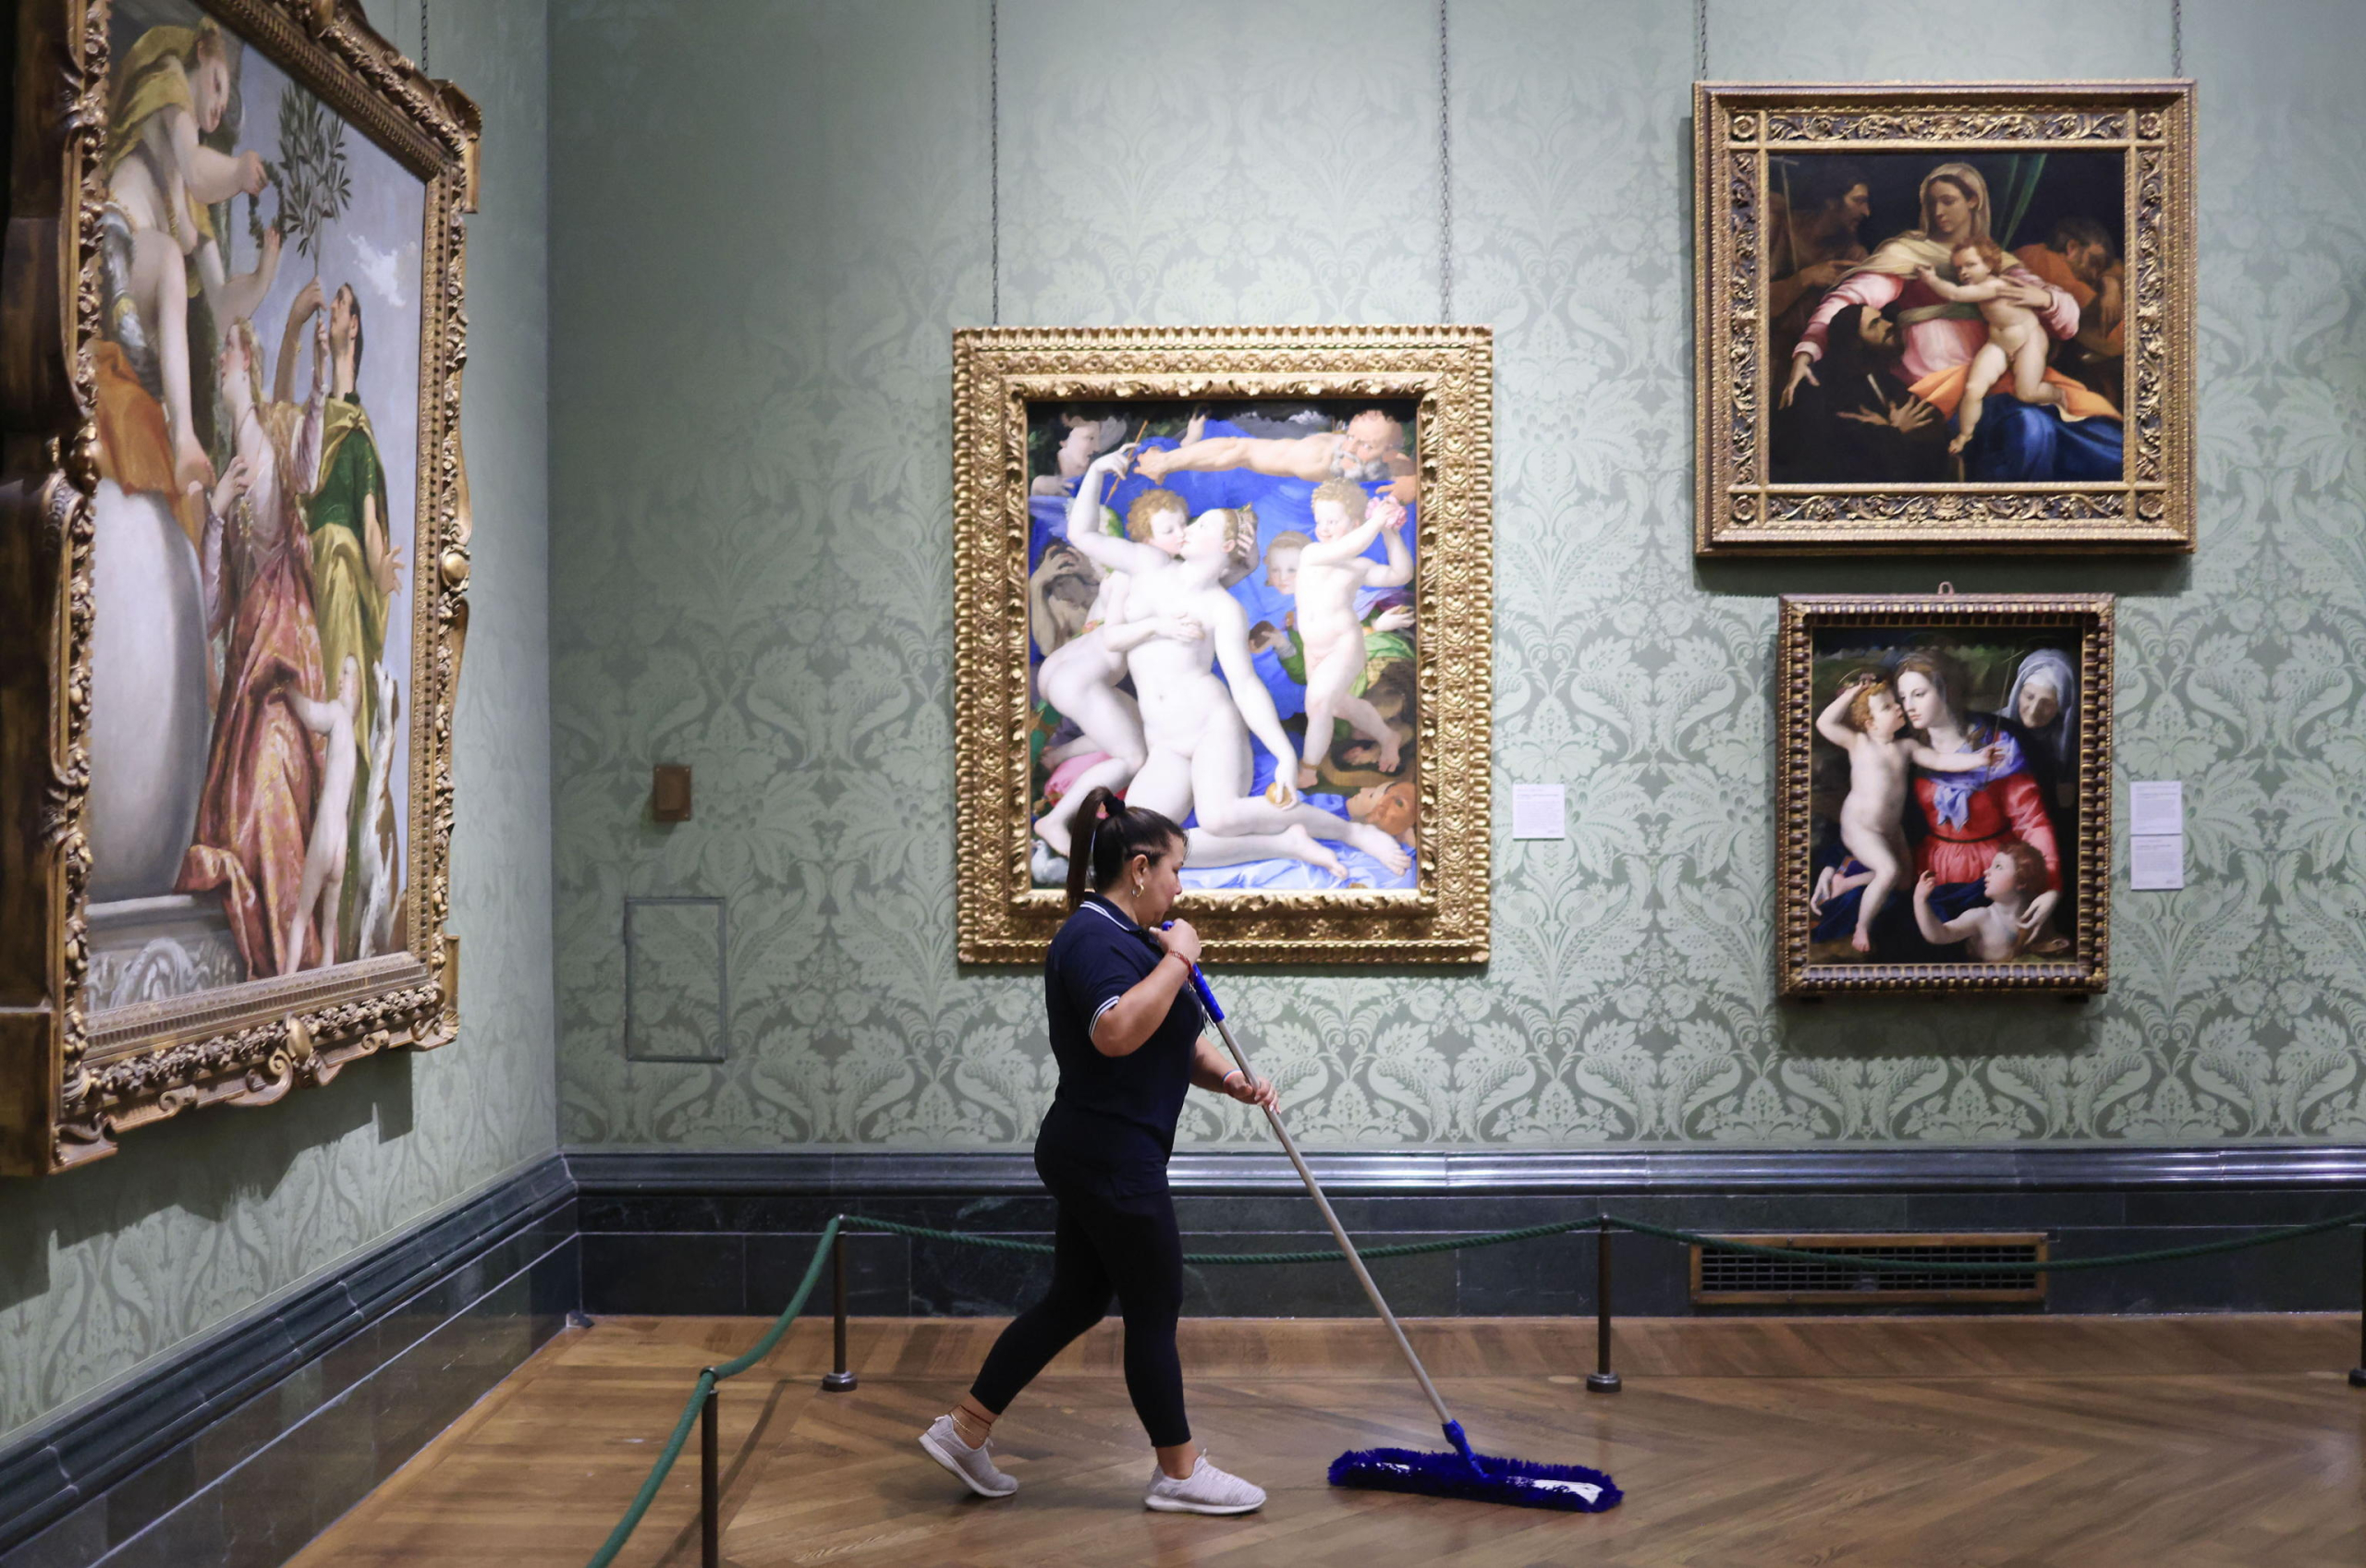 epa11328621 A cleaner sweeps under the painting 'An Allegory with Venus and Cupid' by Bronzino in the National Gallery in London, Britain, 08 May 2024 (issued 09 May 2024). On 10 May 2024 the National Gallery celebrates its Bicentenary. The National Gallery was established in 1824 with the first 38 paintings donated by banker John Julius Angerstein. The collection was initially displayed in a townhouse at 100 Pall Mall. After this became too small,  a new building was completed on Trafalgar Square in 1838 designed by the architect William Wilkins. The art collection currently comprises 2,300 works, spanning the major traditions of Western European painting with works by Van Gogh, Caravaggio, Turner, Constable, Michelangelo, Velazquez and Rembrandt. The National Gallery building welcomed over three million visitors in 2023,  which is open 361 days a year, free of charge. The National Gallery will mark the bicentenary year with 12 months of events celebrating art and creativity across the UK.  EPA/NEIL HALL  ATTENTION: This Image is part of a PHOTO SET